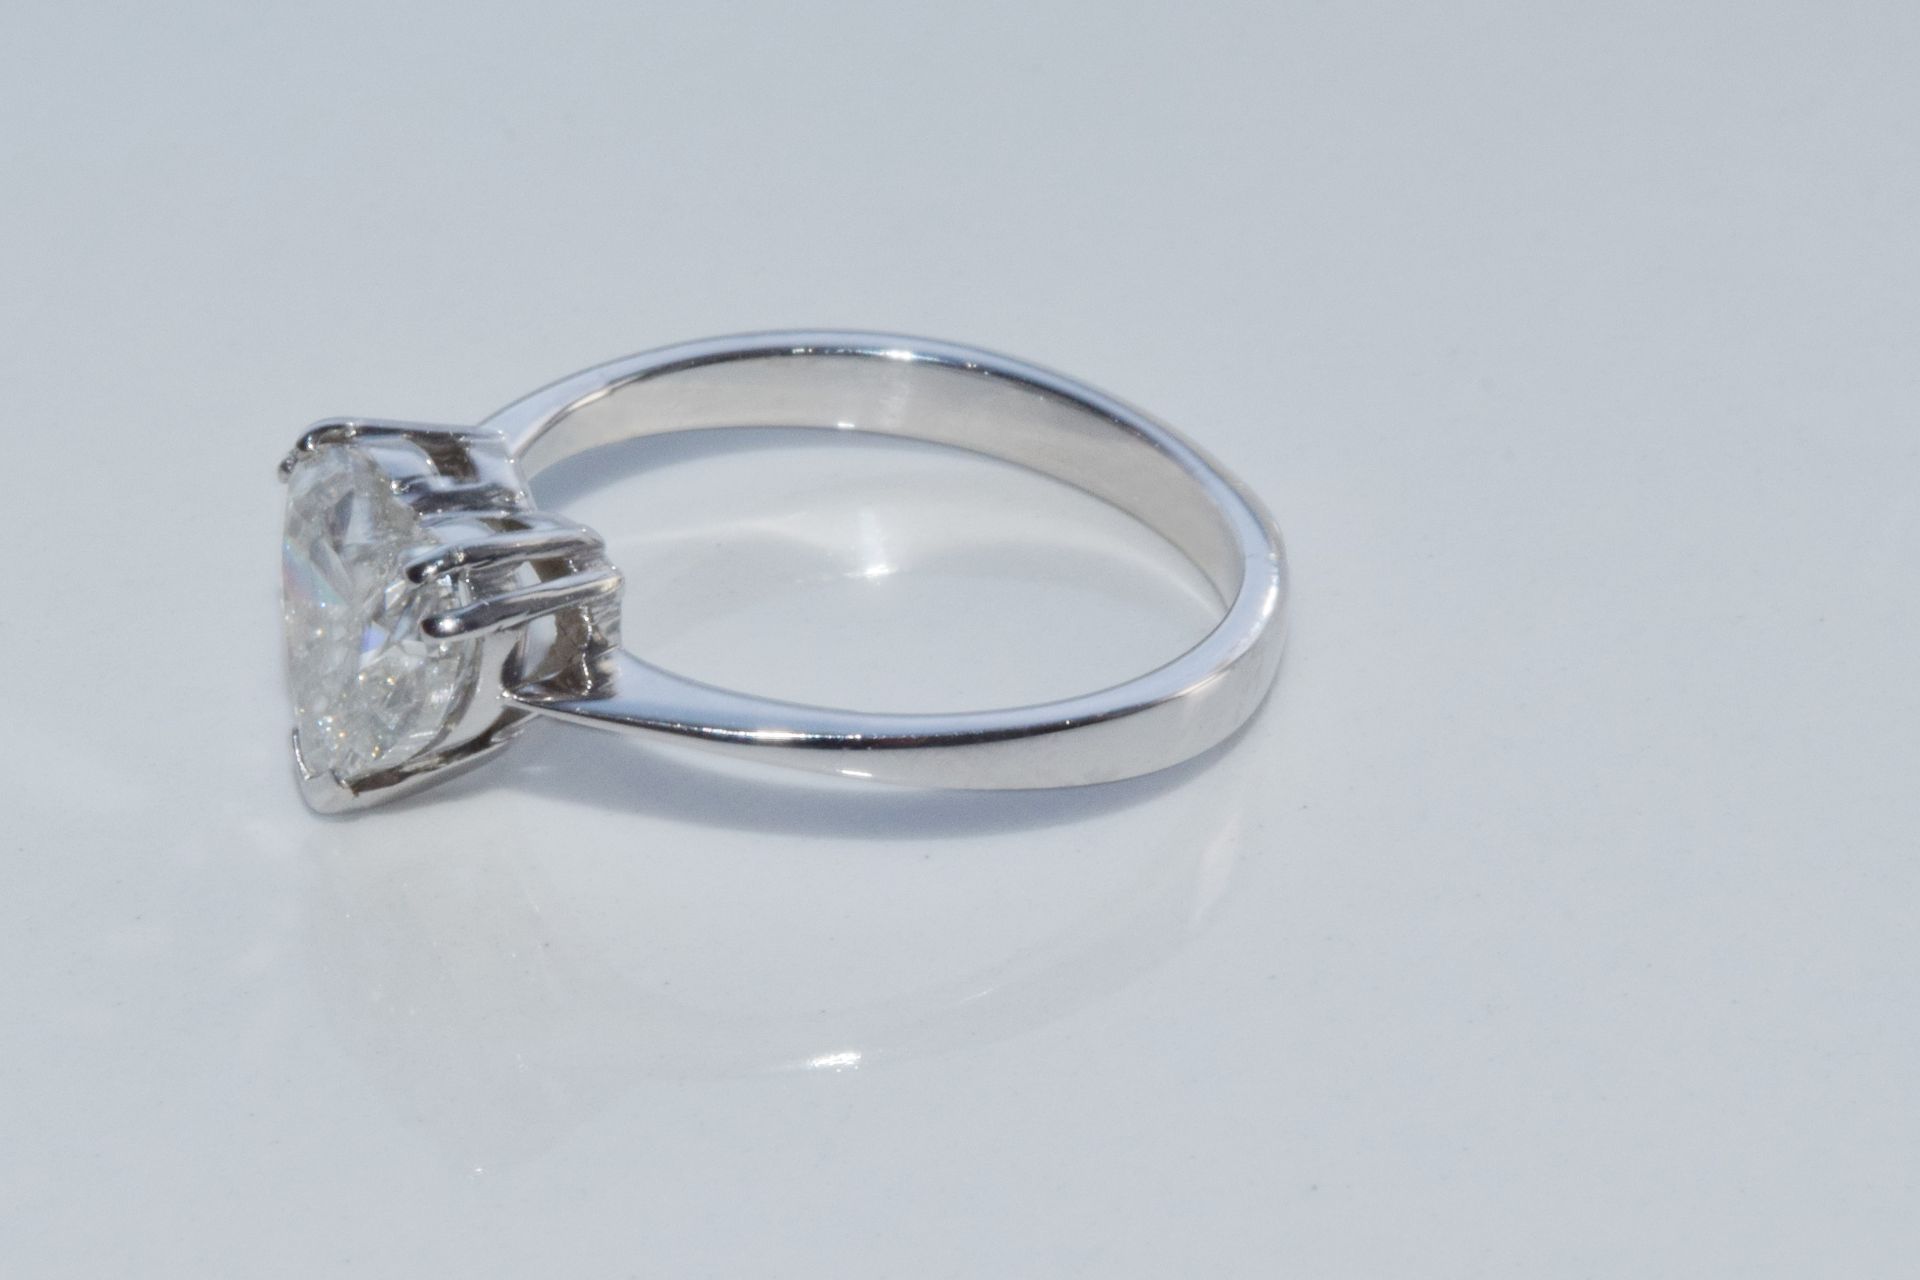 2.16ct Heart cut diamond ring mounted on 18ct white gold band - Image 5 of 5